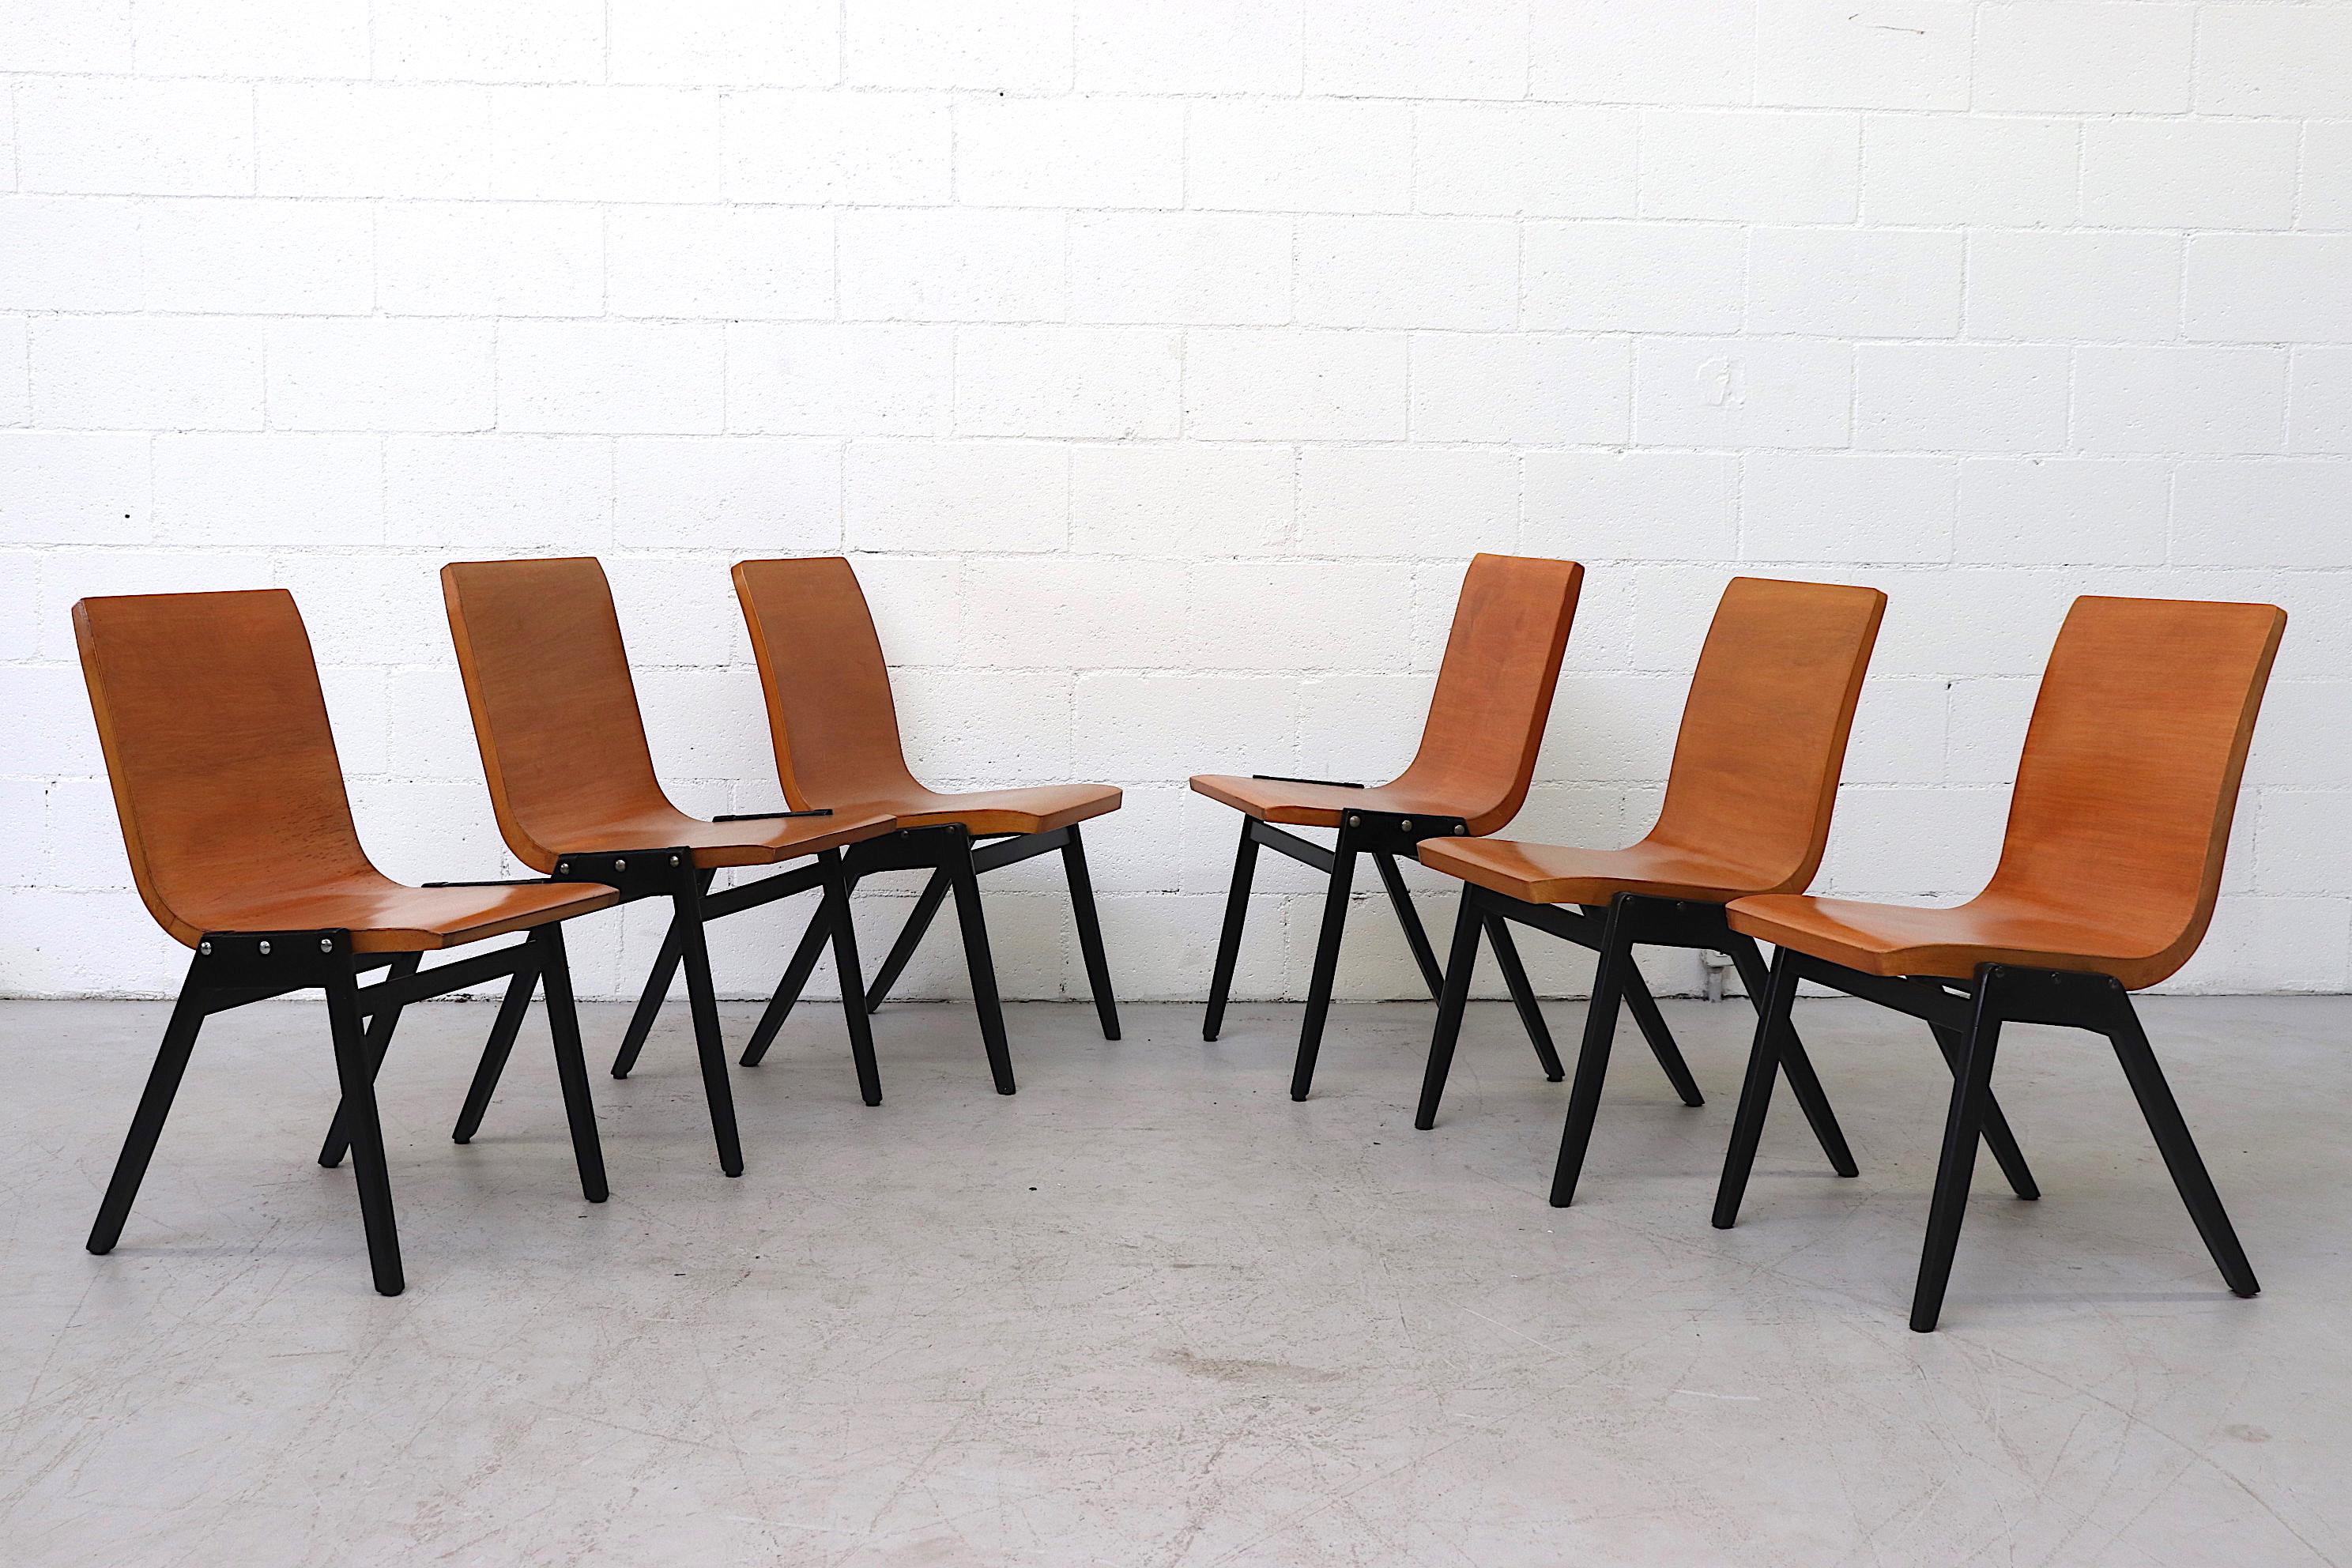 Gorgeous Set of 6 assorted Stacking Chairs designed by the Austrian architect Roland Rainer for the Vienna City Hall in 1952. Light Natural Beech Wood Seats with Black Wood Frame. Delicate Thin Bentwood Seating Surface. Not an exact set, but all